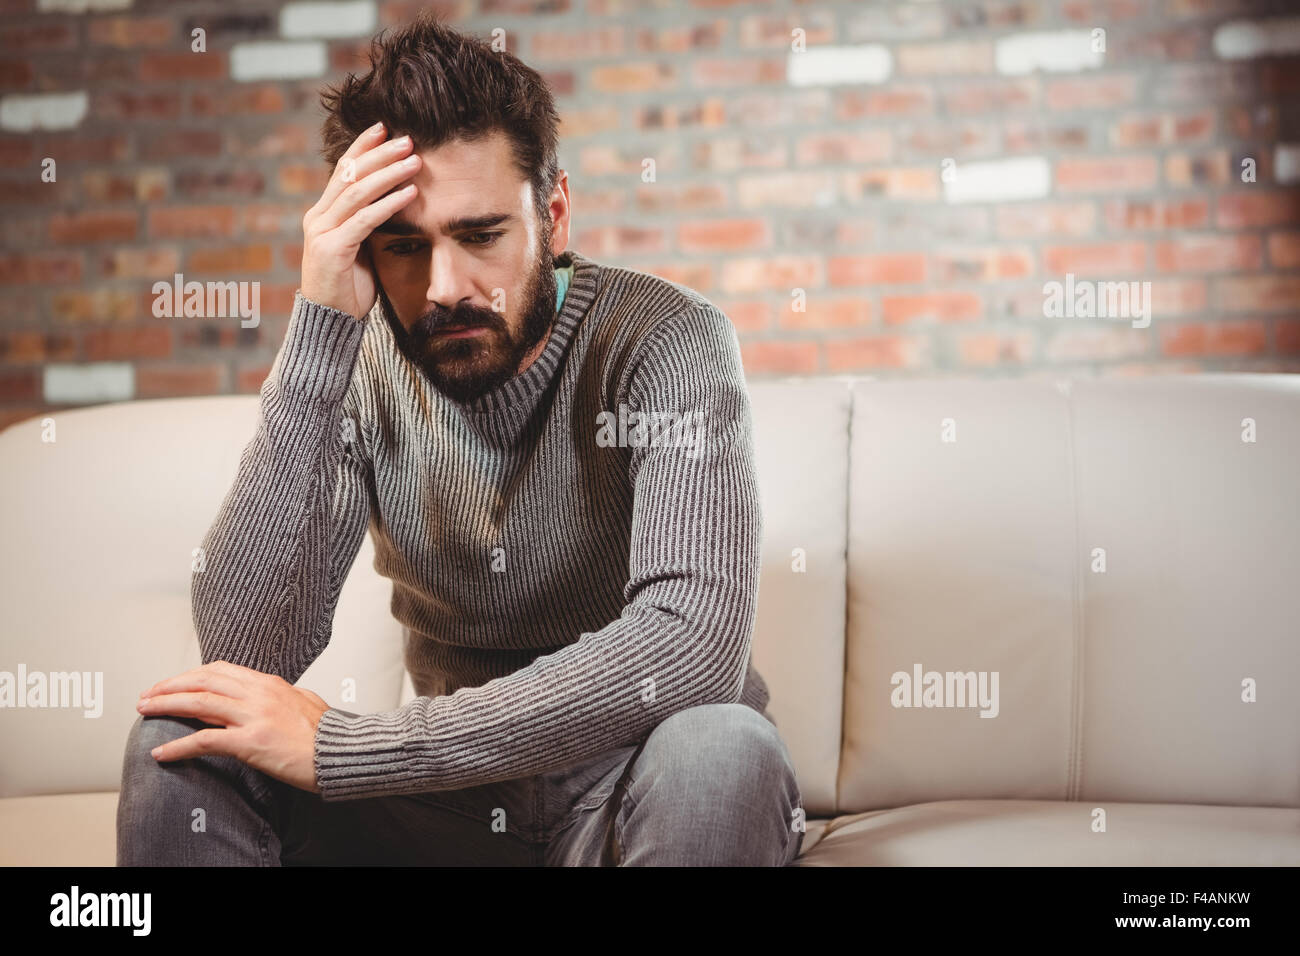 Depressed man with hand on forehead Stock Photo